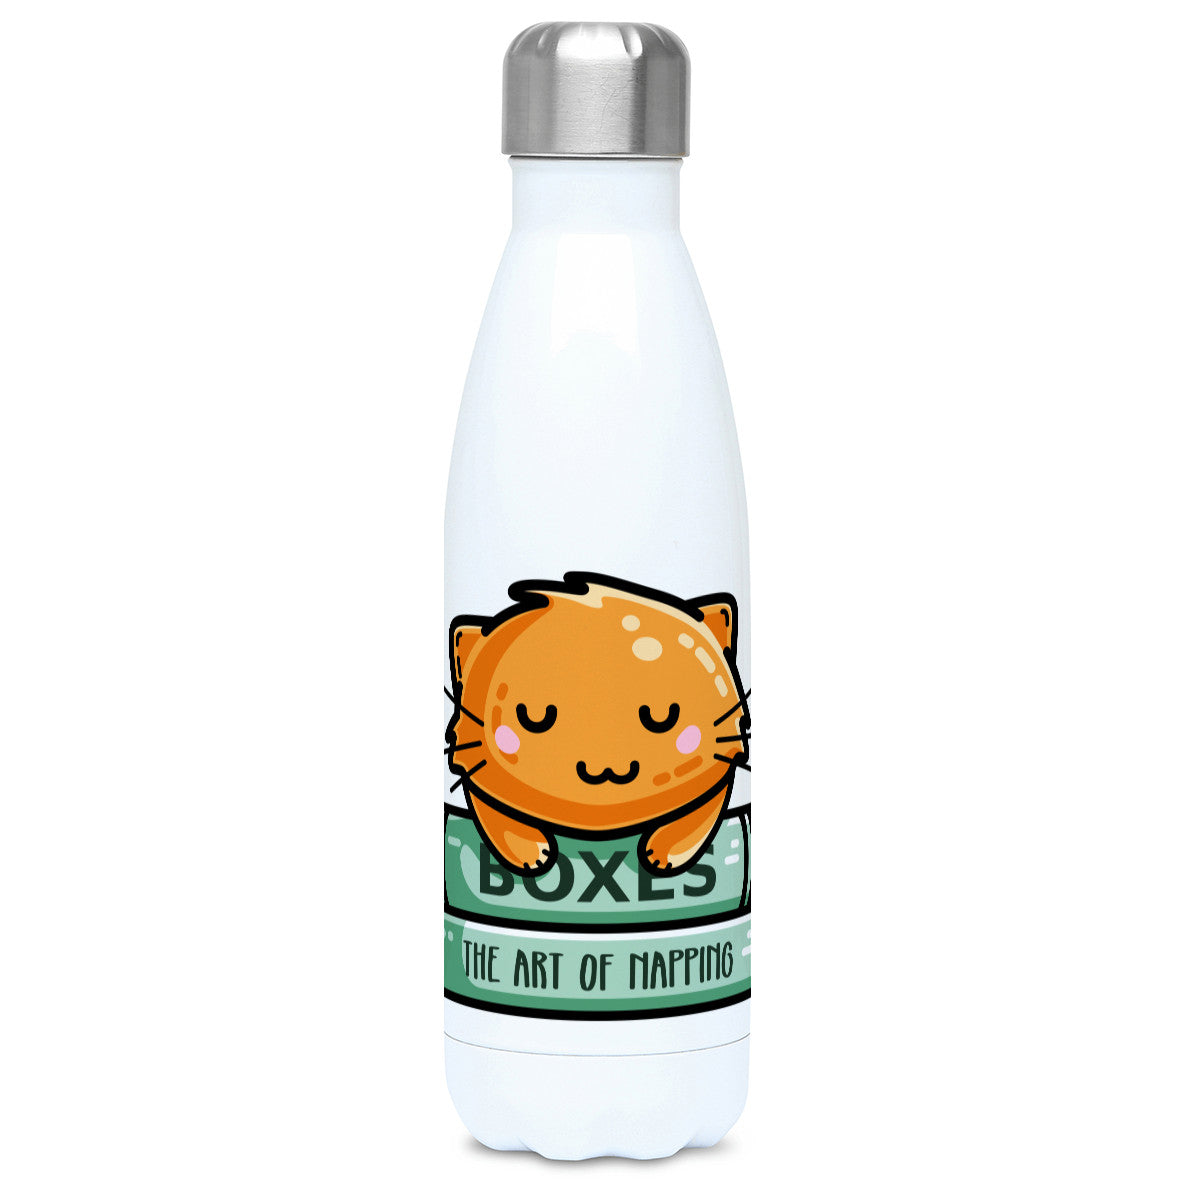 Cute ginger cat asleep on two books design on a white metal insulated drinks bottle, lid on